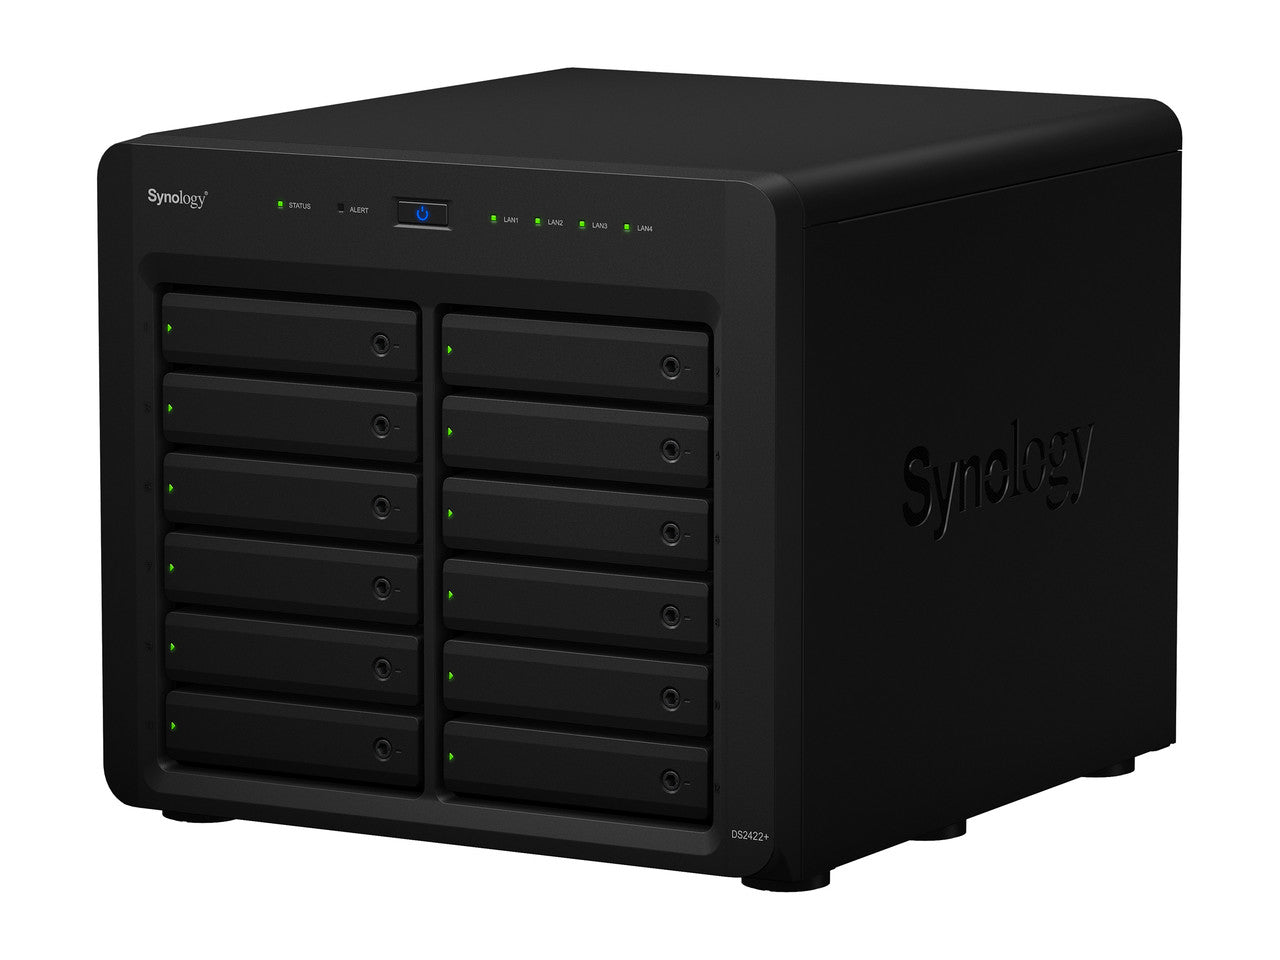 Synology DS2422+ Quad Core 2.2Ghz 12-Bay NAS with 32GB RAM and 96TB (12 x 8TB) of Synology Enterprise (HAT5300) Drives